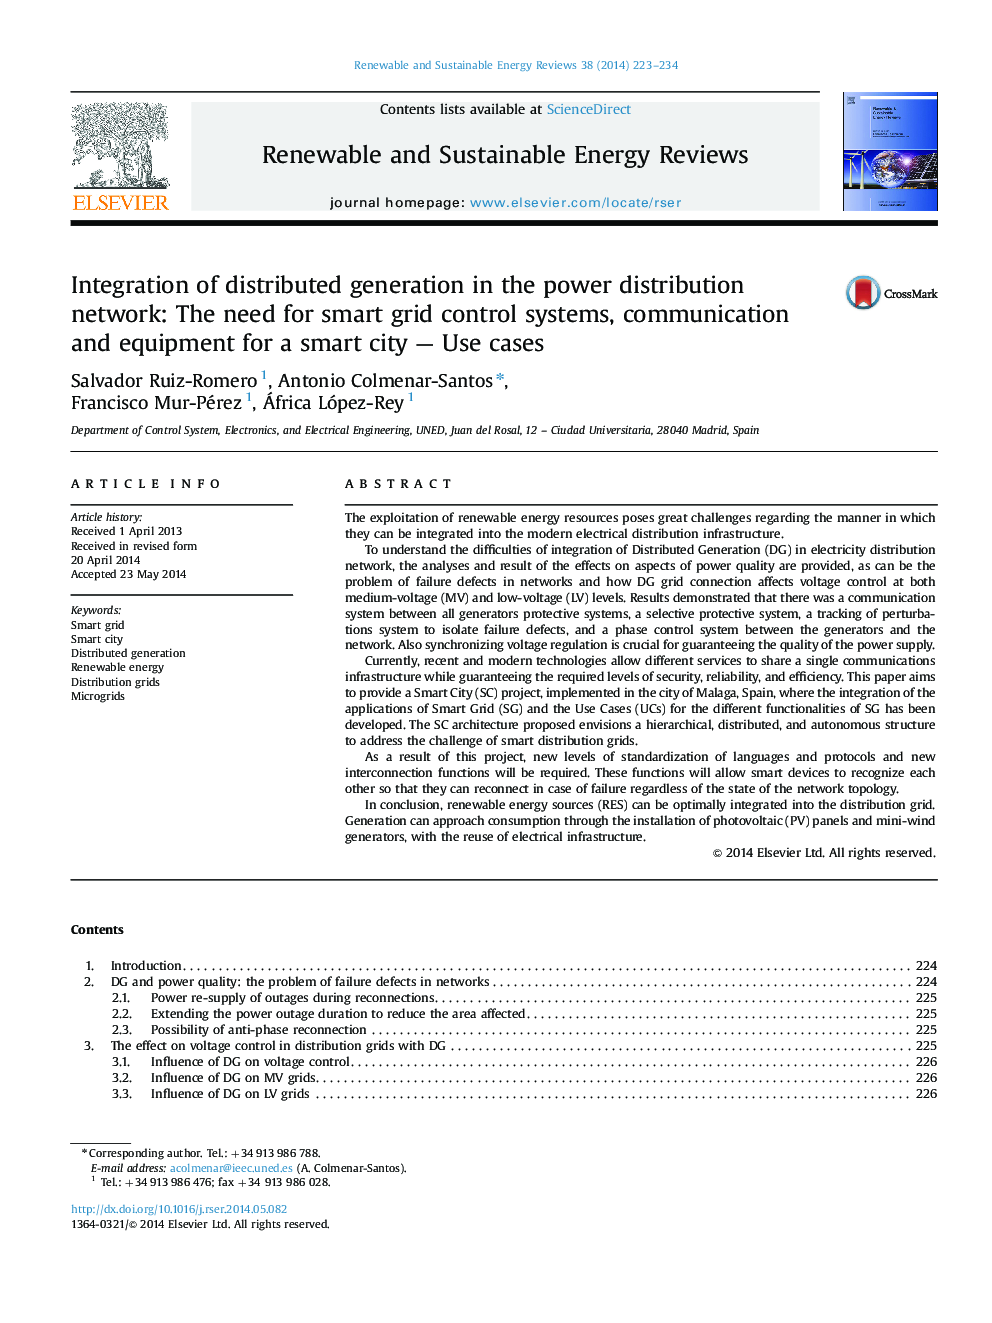 Integration of distributed generation in the power distribution network: The need for smart grid control systems, communication and equipment for a smart city - Use cases